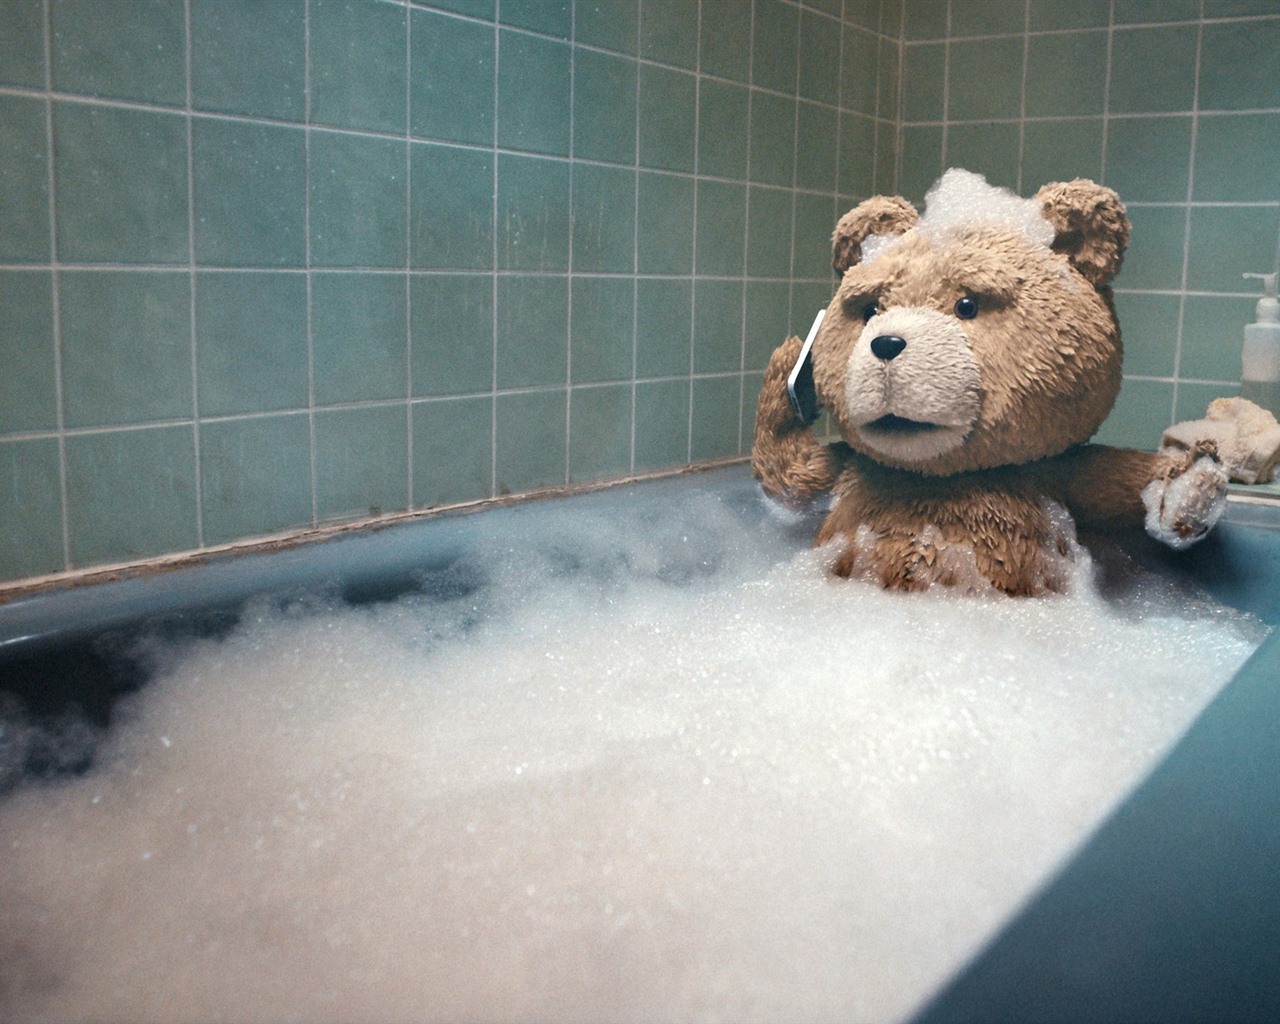 Ted 2012 HD movie wallpapers #2 - 1280x1024